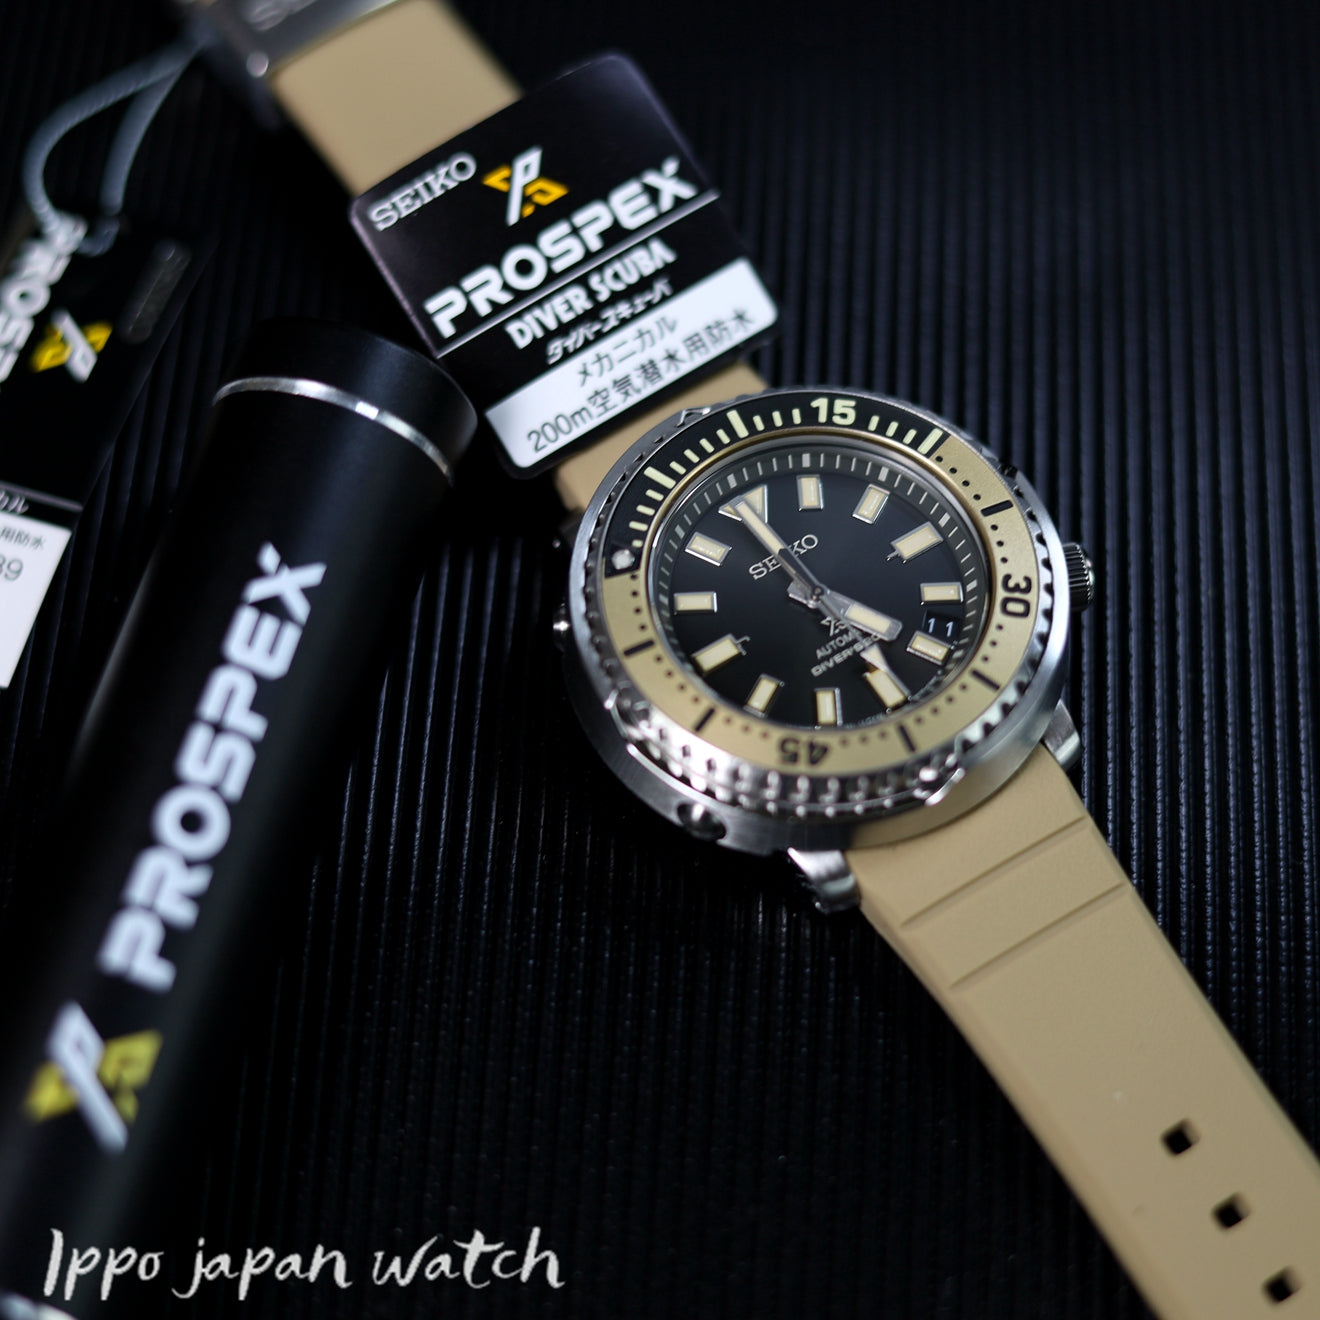 Seiko Prospex Diver SBDY089 Diver's 200M Men's Watch - IPPO JAPAN WATCH 